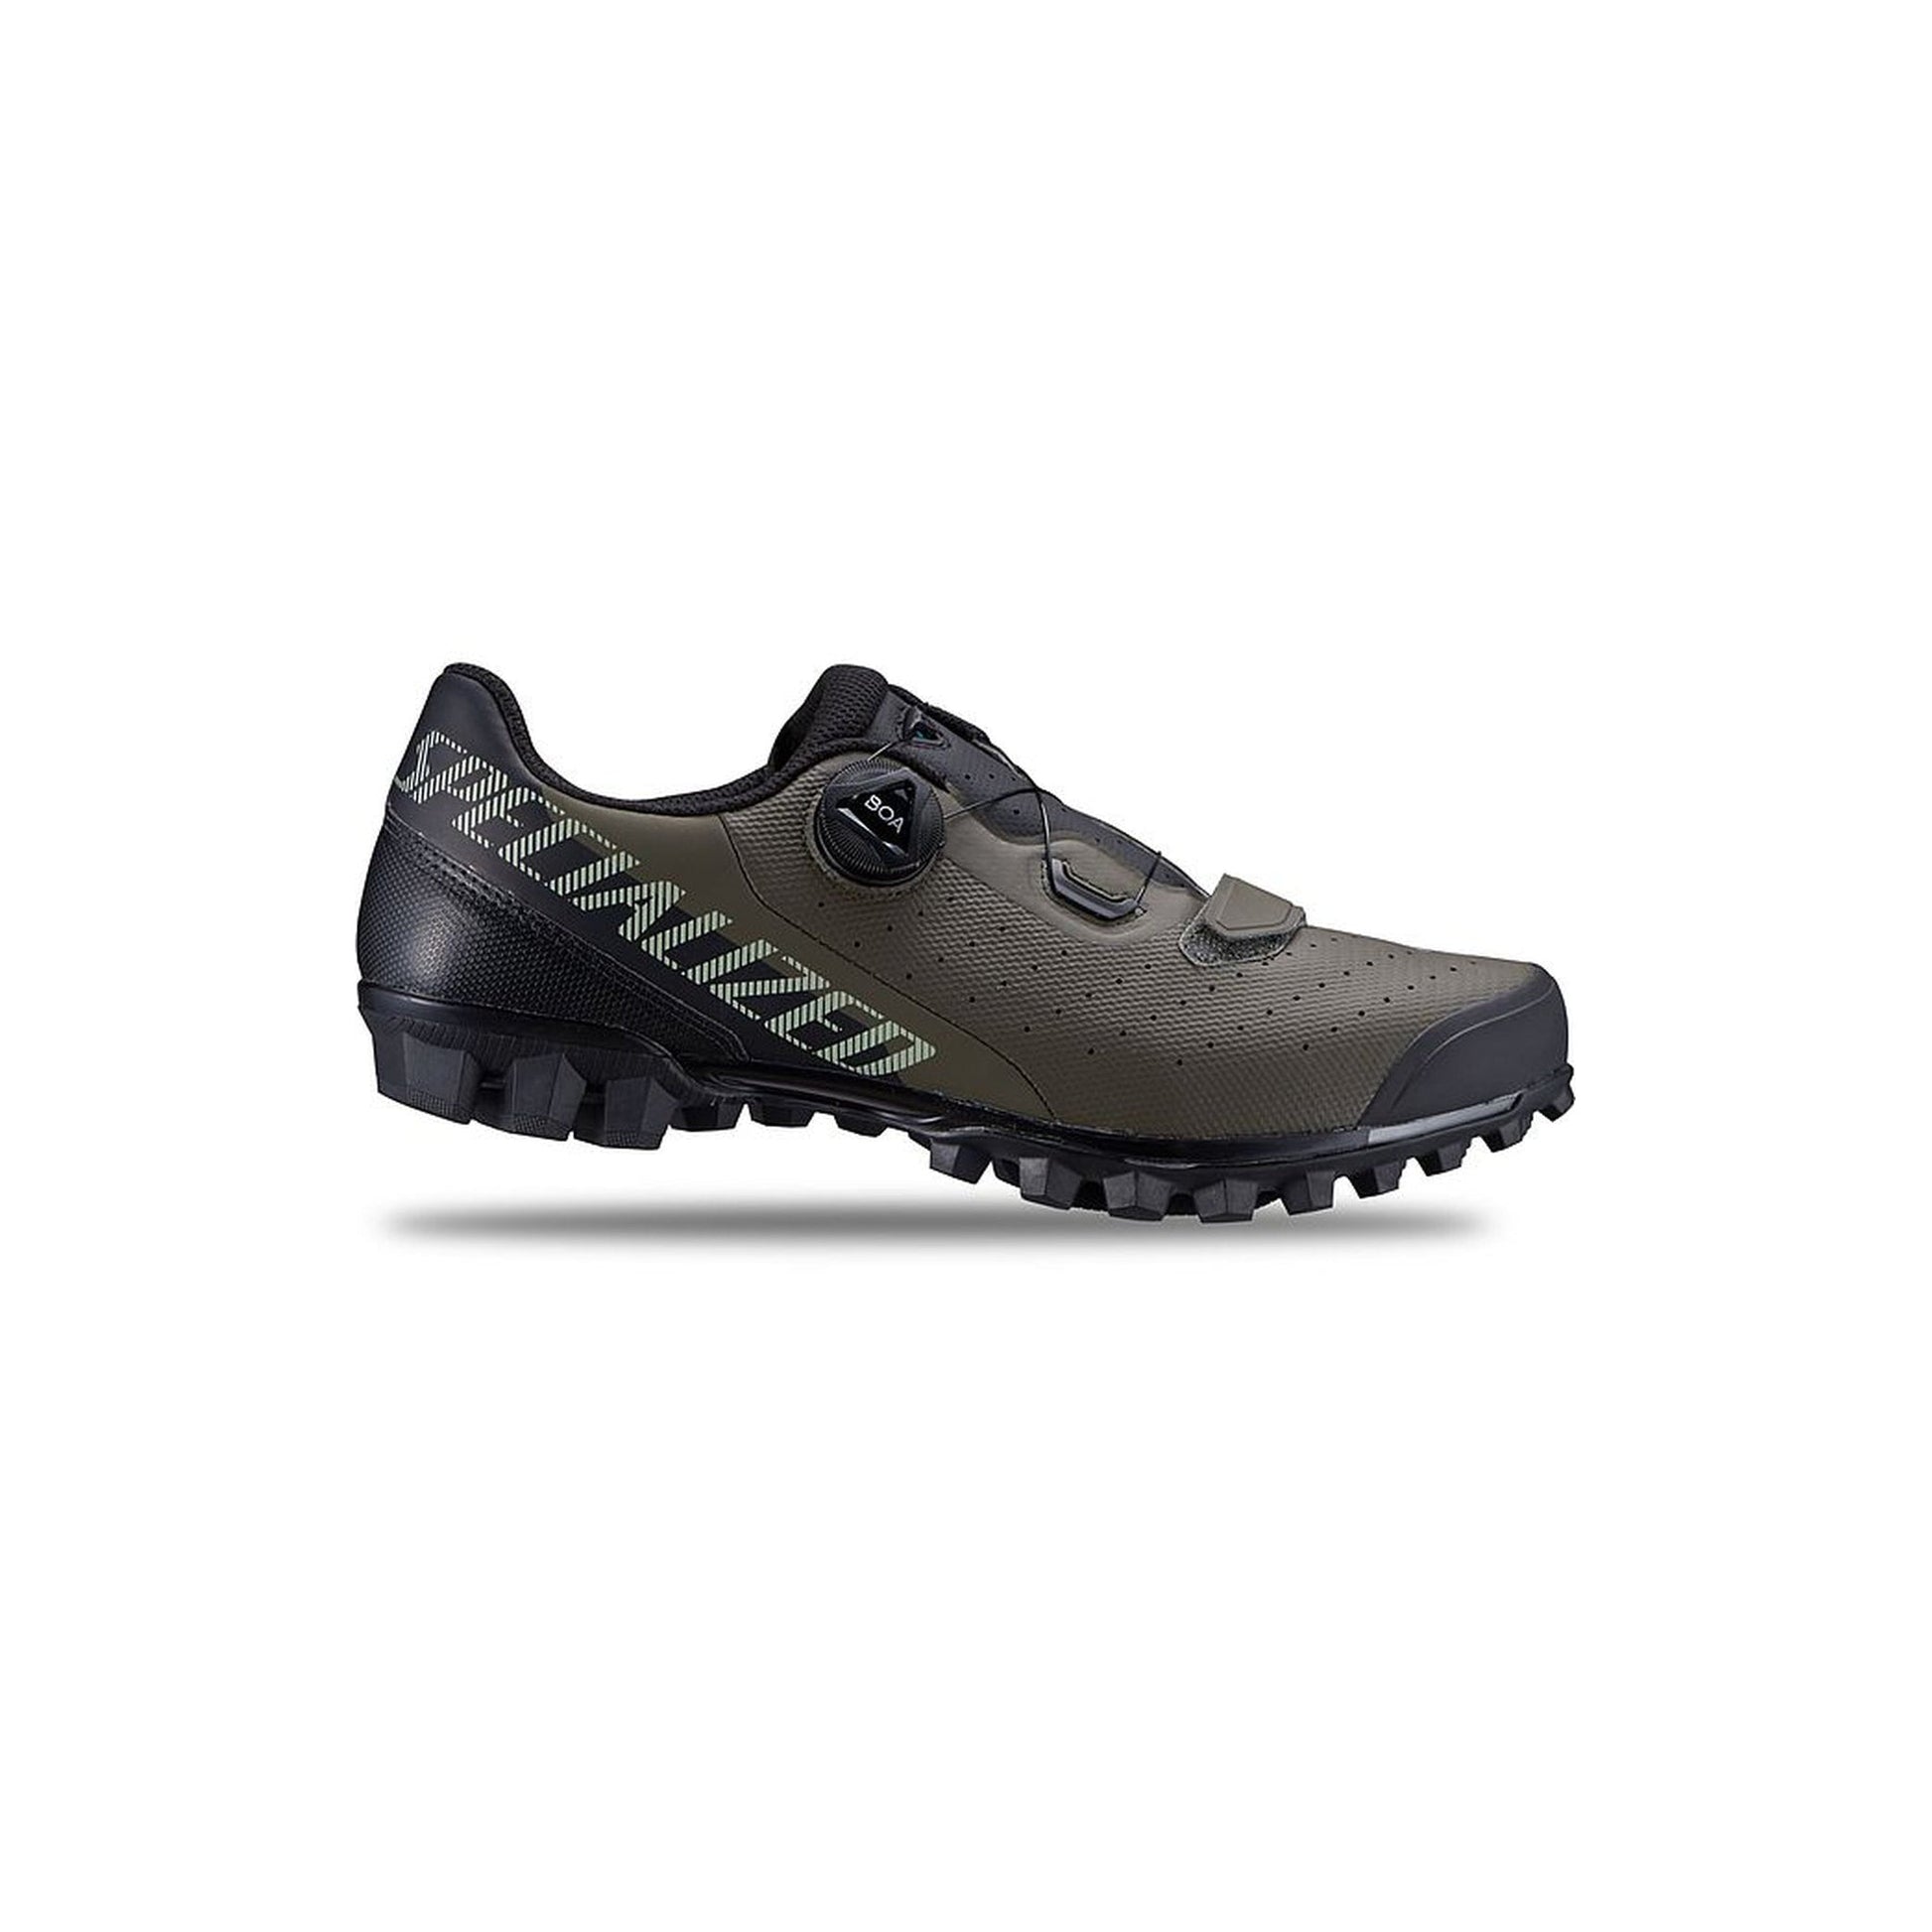 Recon 2.0 Mountain Bike Shoes-Cycles Direct Specialized